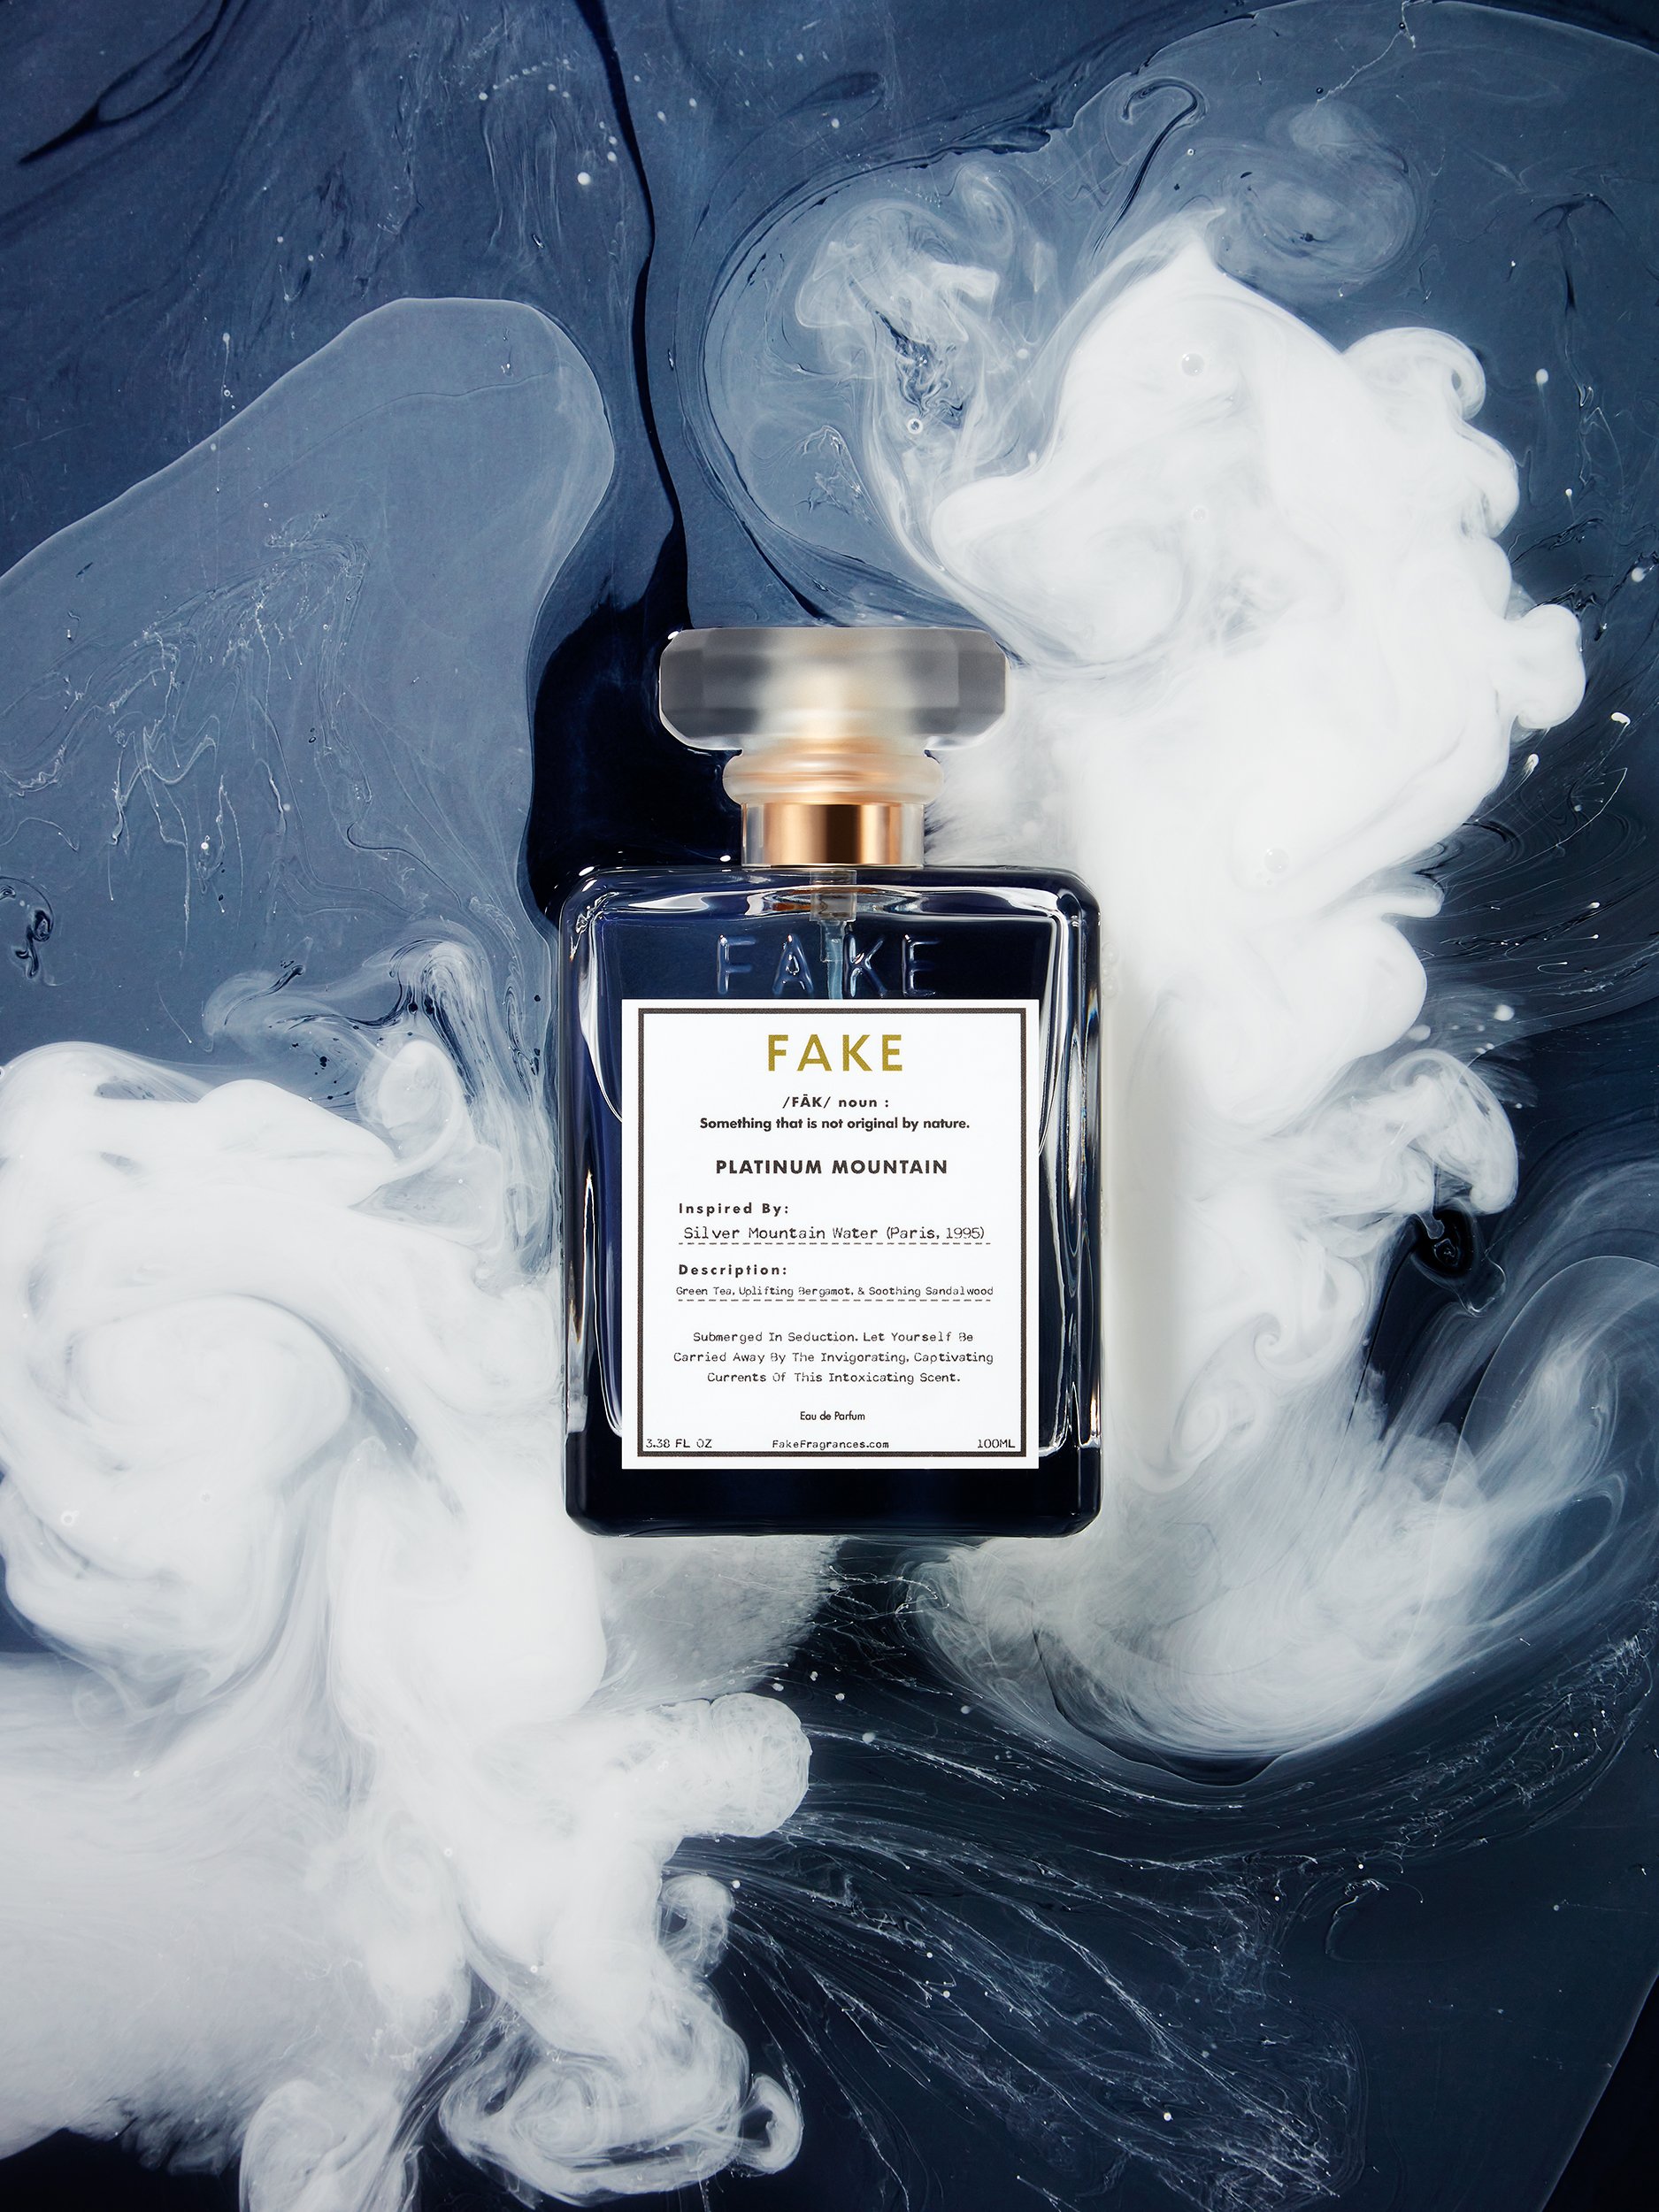 Fake perfume product photography - perfume  photography by Simon Lyle Ritchie